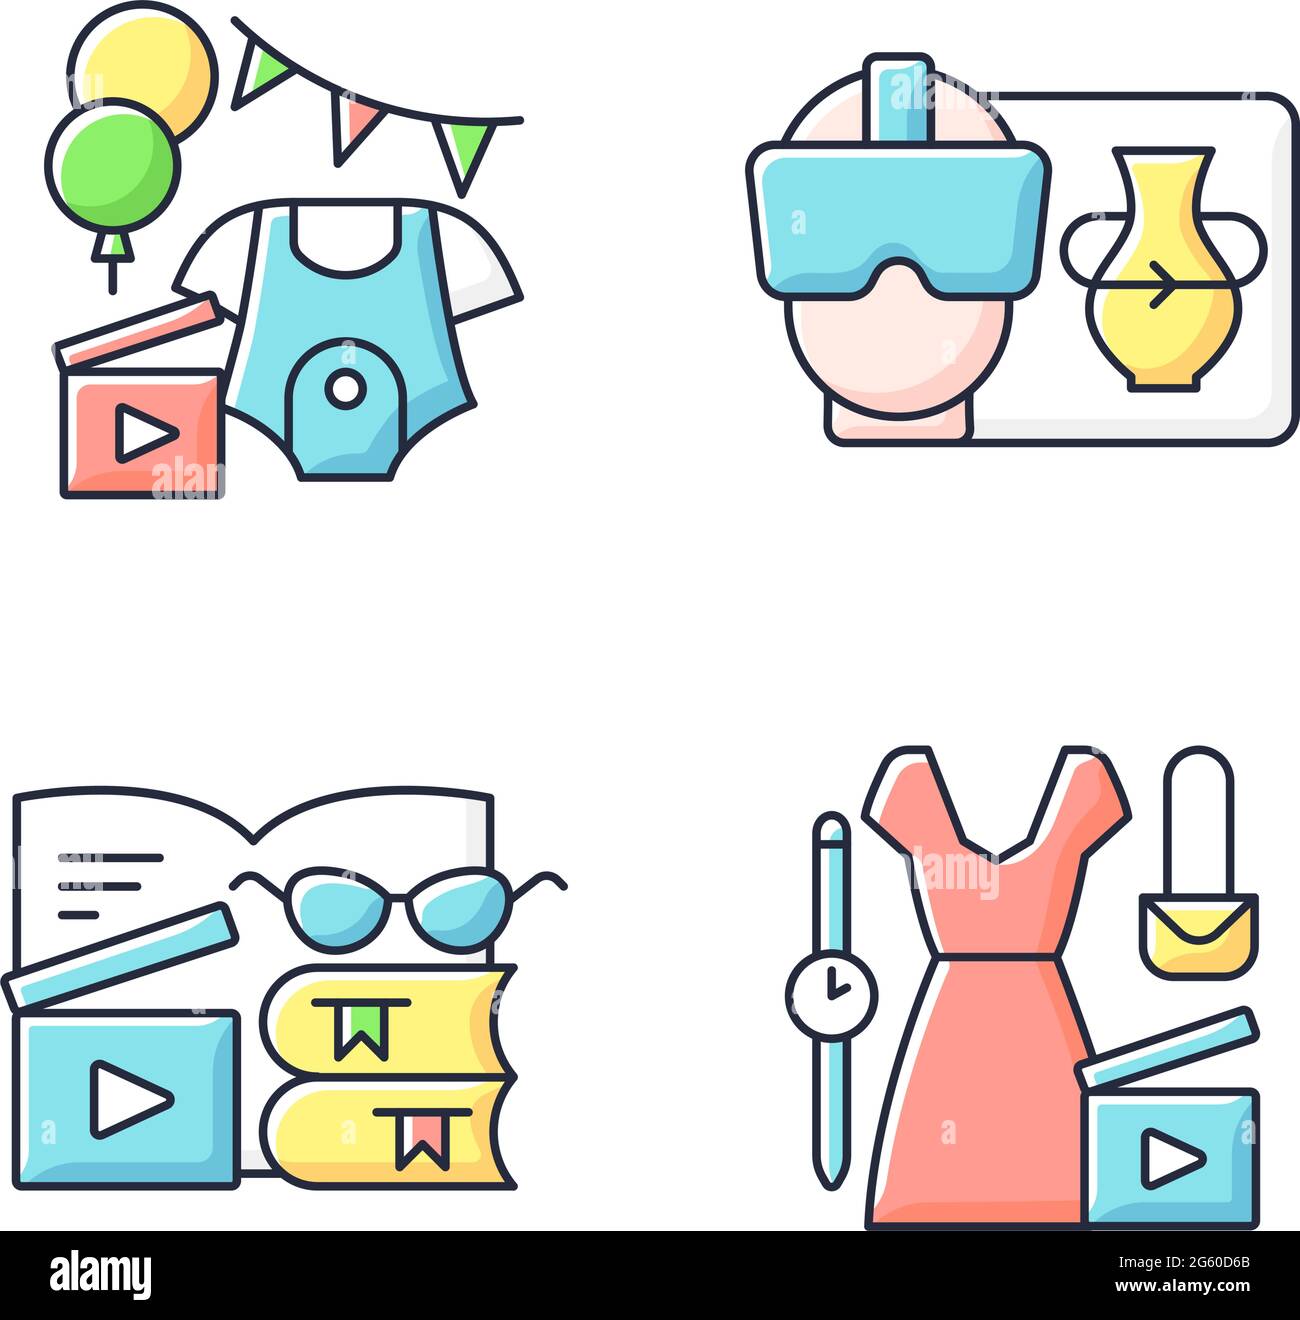 Types of video RGB color icons set Stock Vector